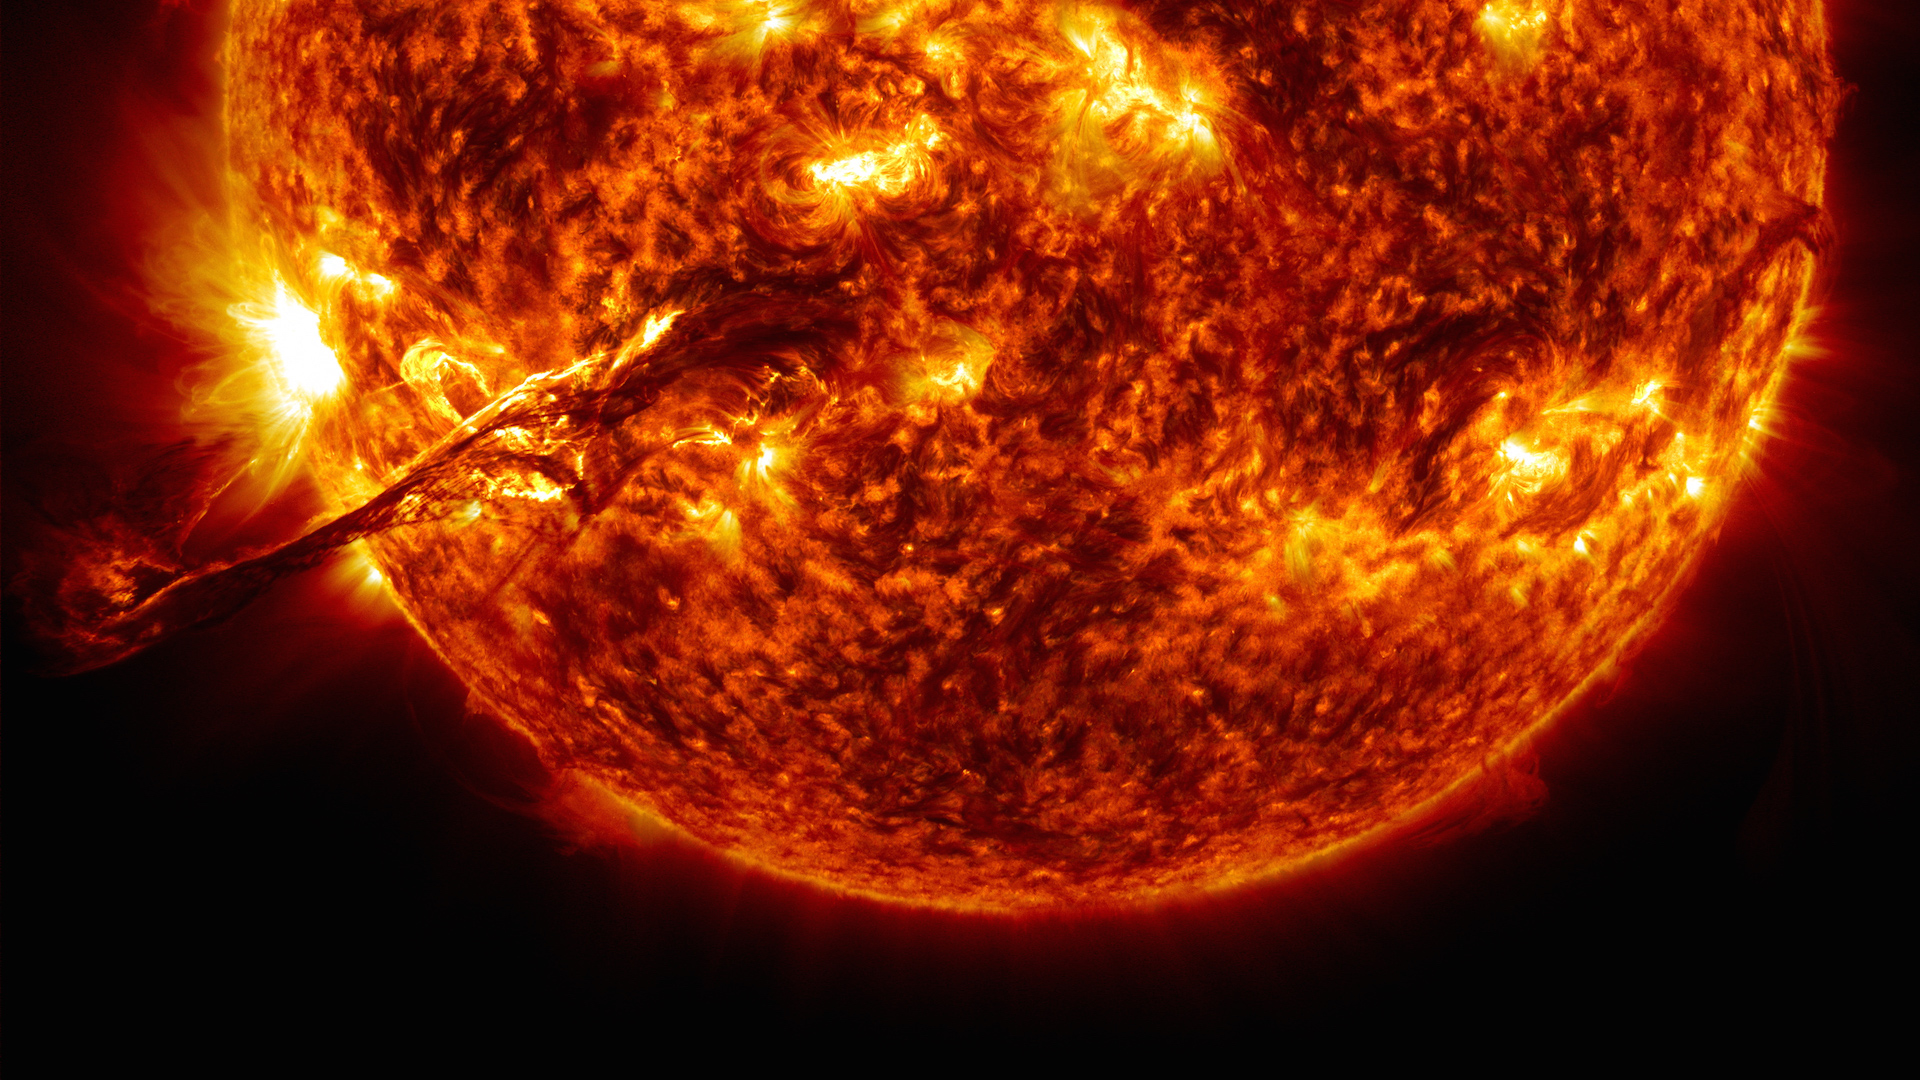 High Definition Pictures Of The Sun - 1920x1080 Wallpaper 